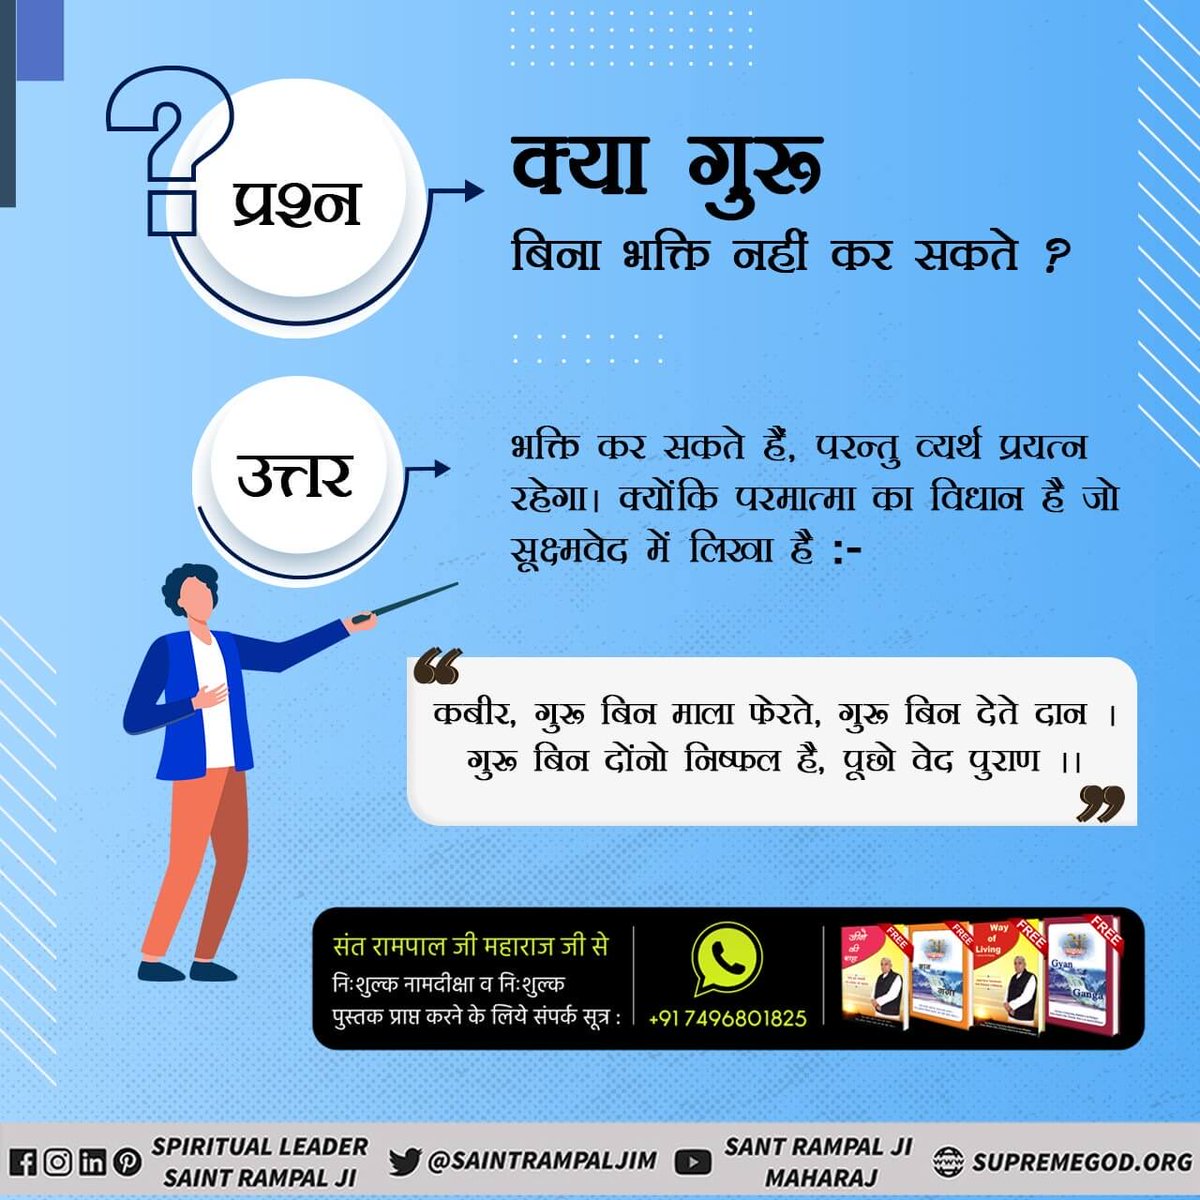 #GodMorningMonday To get more download our official app Sant Rampal Maharaj On google play store 🙏